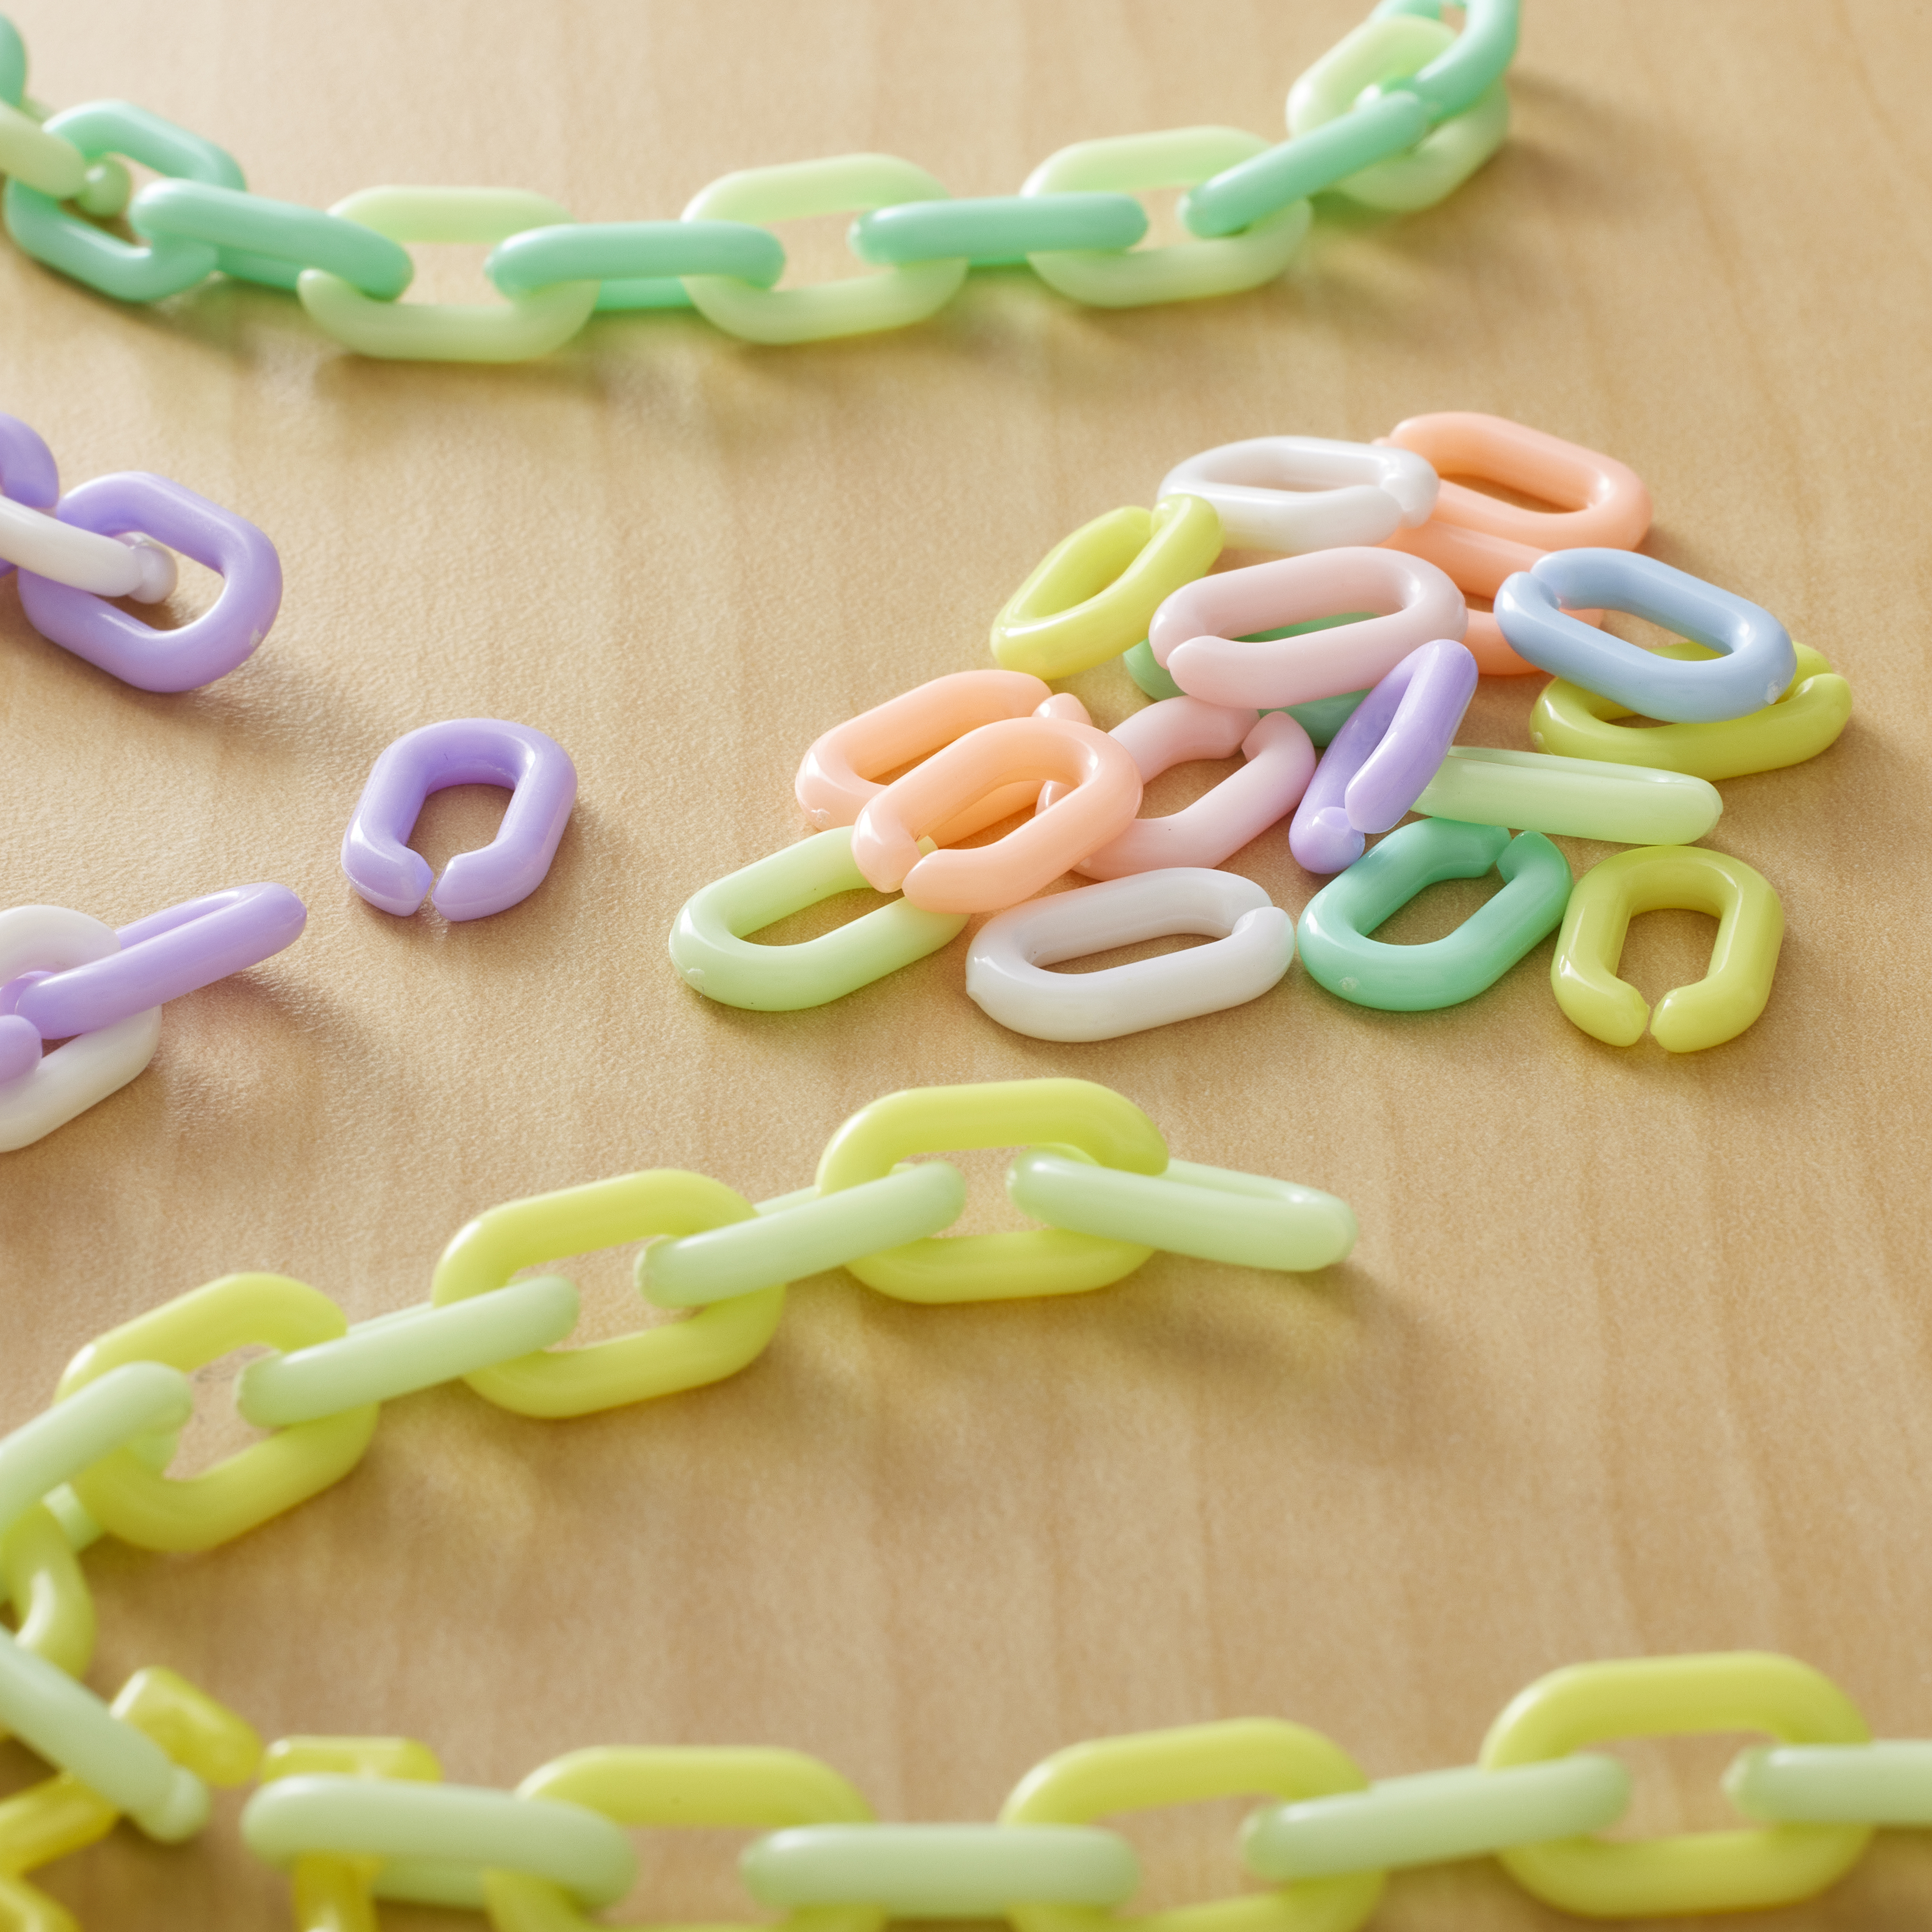 Michaels Bulk 12 Packs: 400 Ct. (4,800 Total) Pastel Plastic Chain Links by Creatology, Girl's, Size: 0.55 x 0.35, Assorted